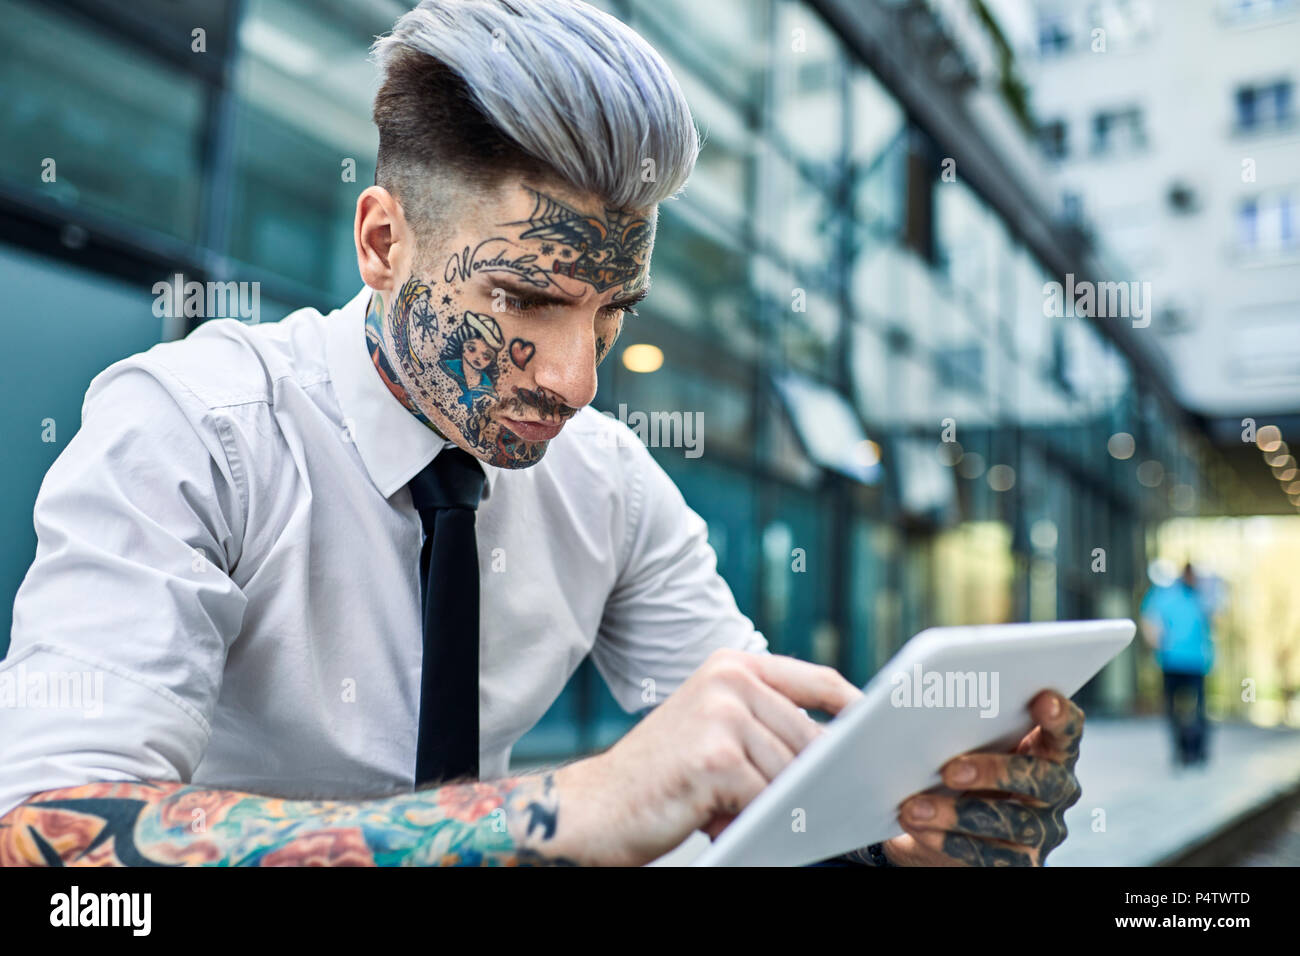 Portrait of young businessman with tattoos on his forearms stock photo